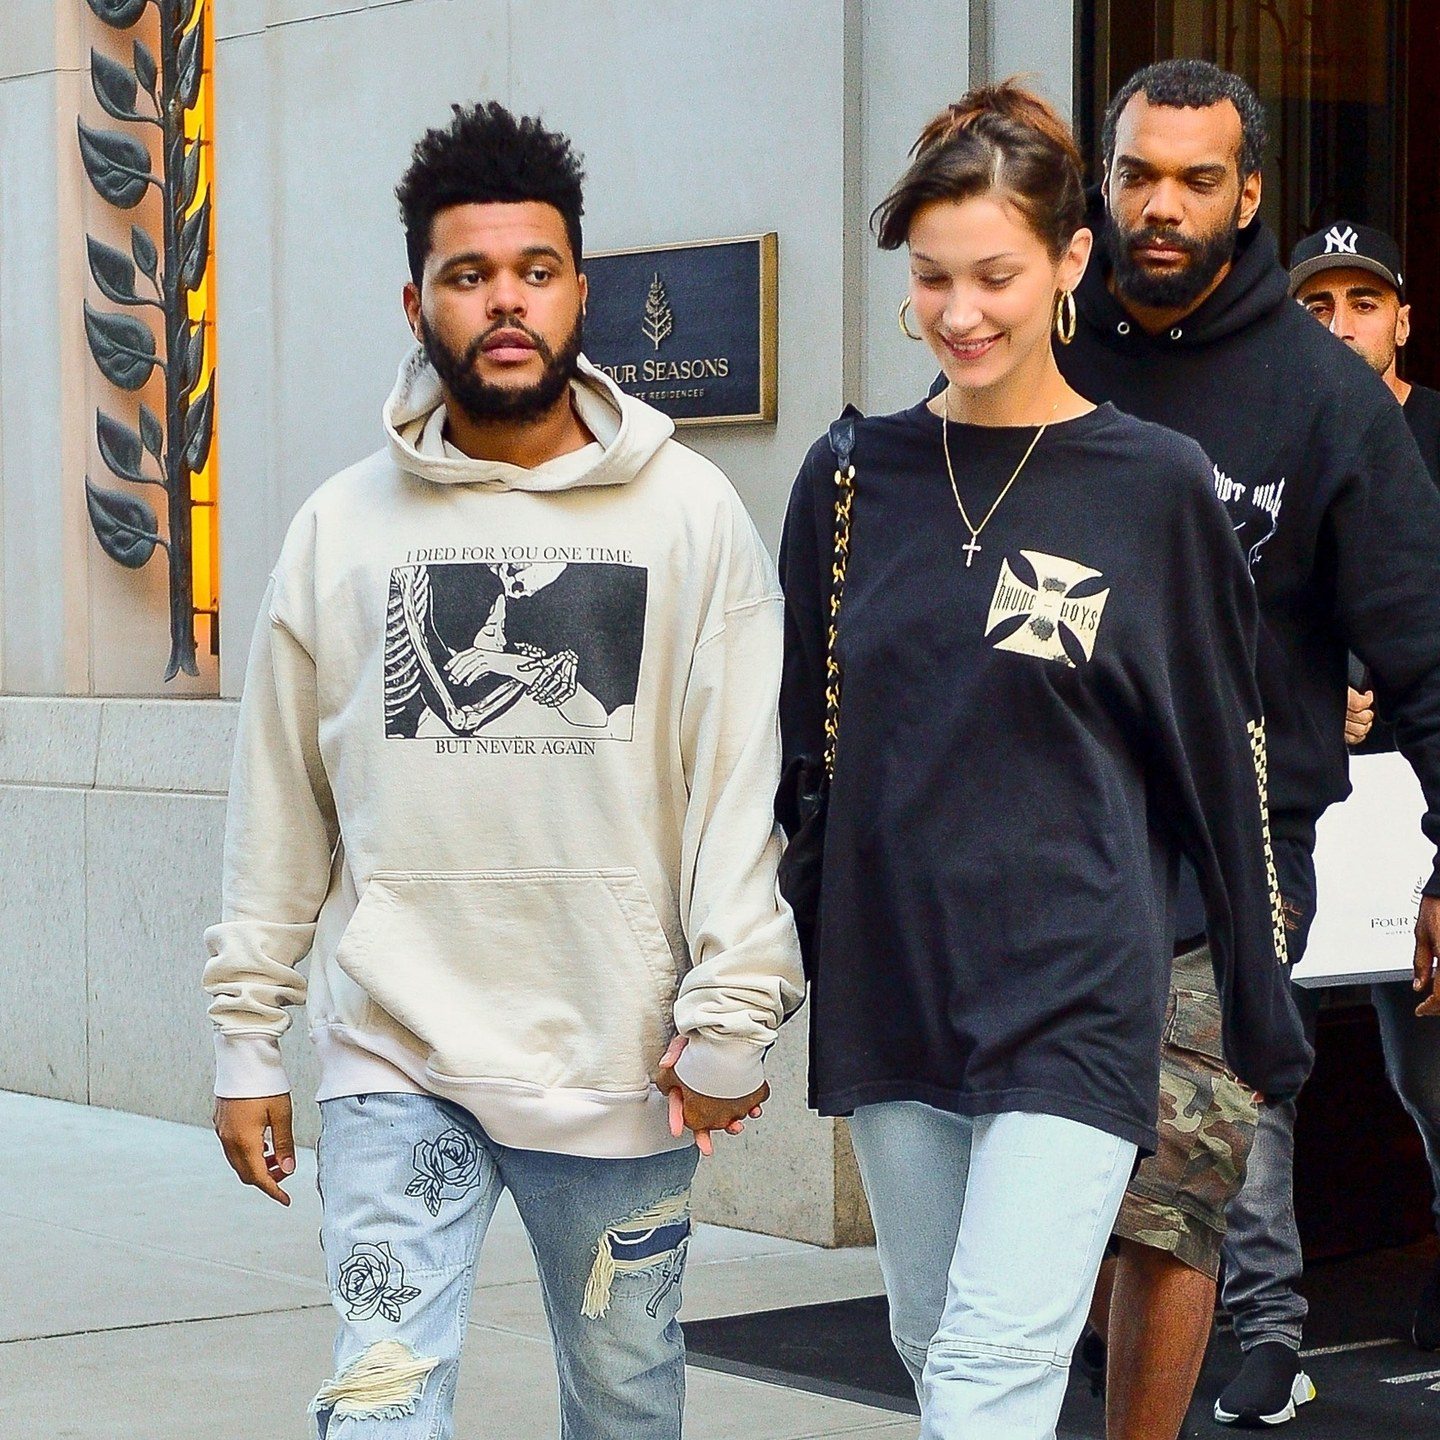 Bella Hadid Trades The Catwalk For Matchy-Matchy Date Night With The Weeknd, British Vogue